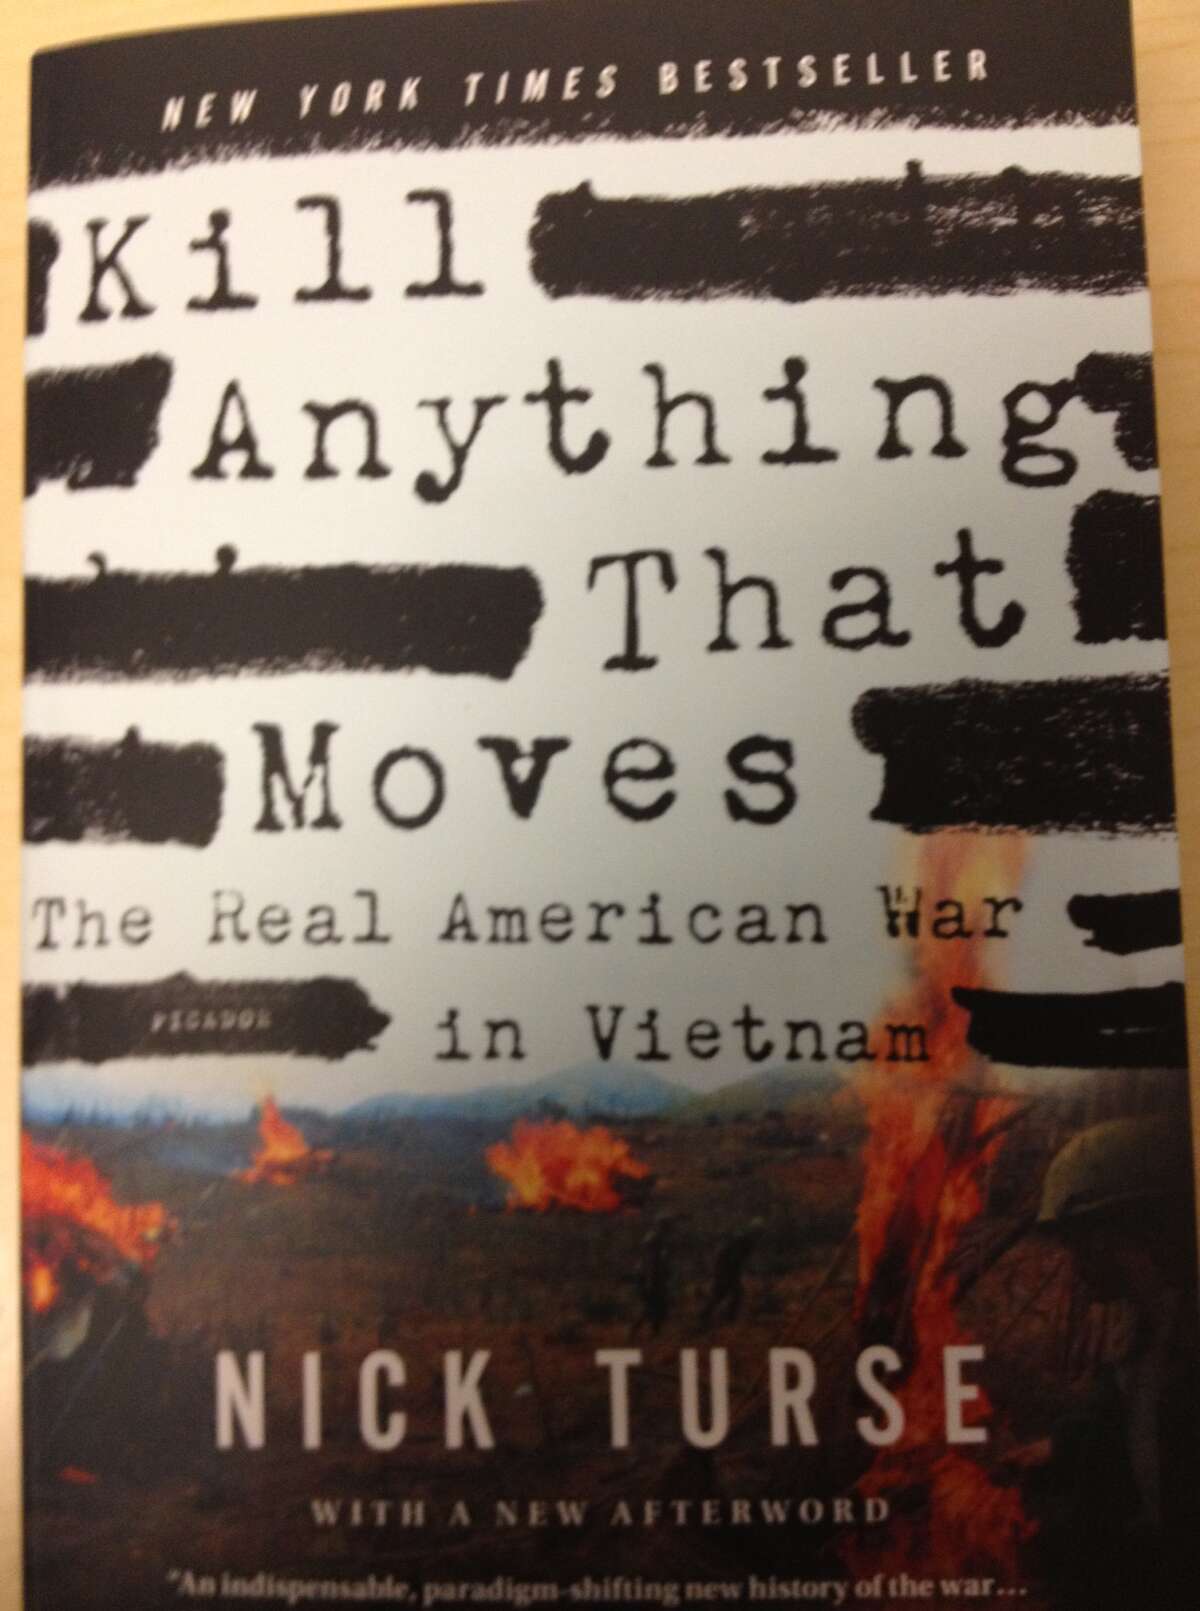 Cover of "Kill Anything That Moves" by Nick Turse